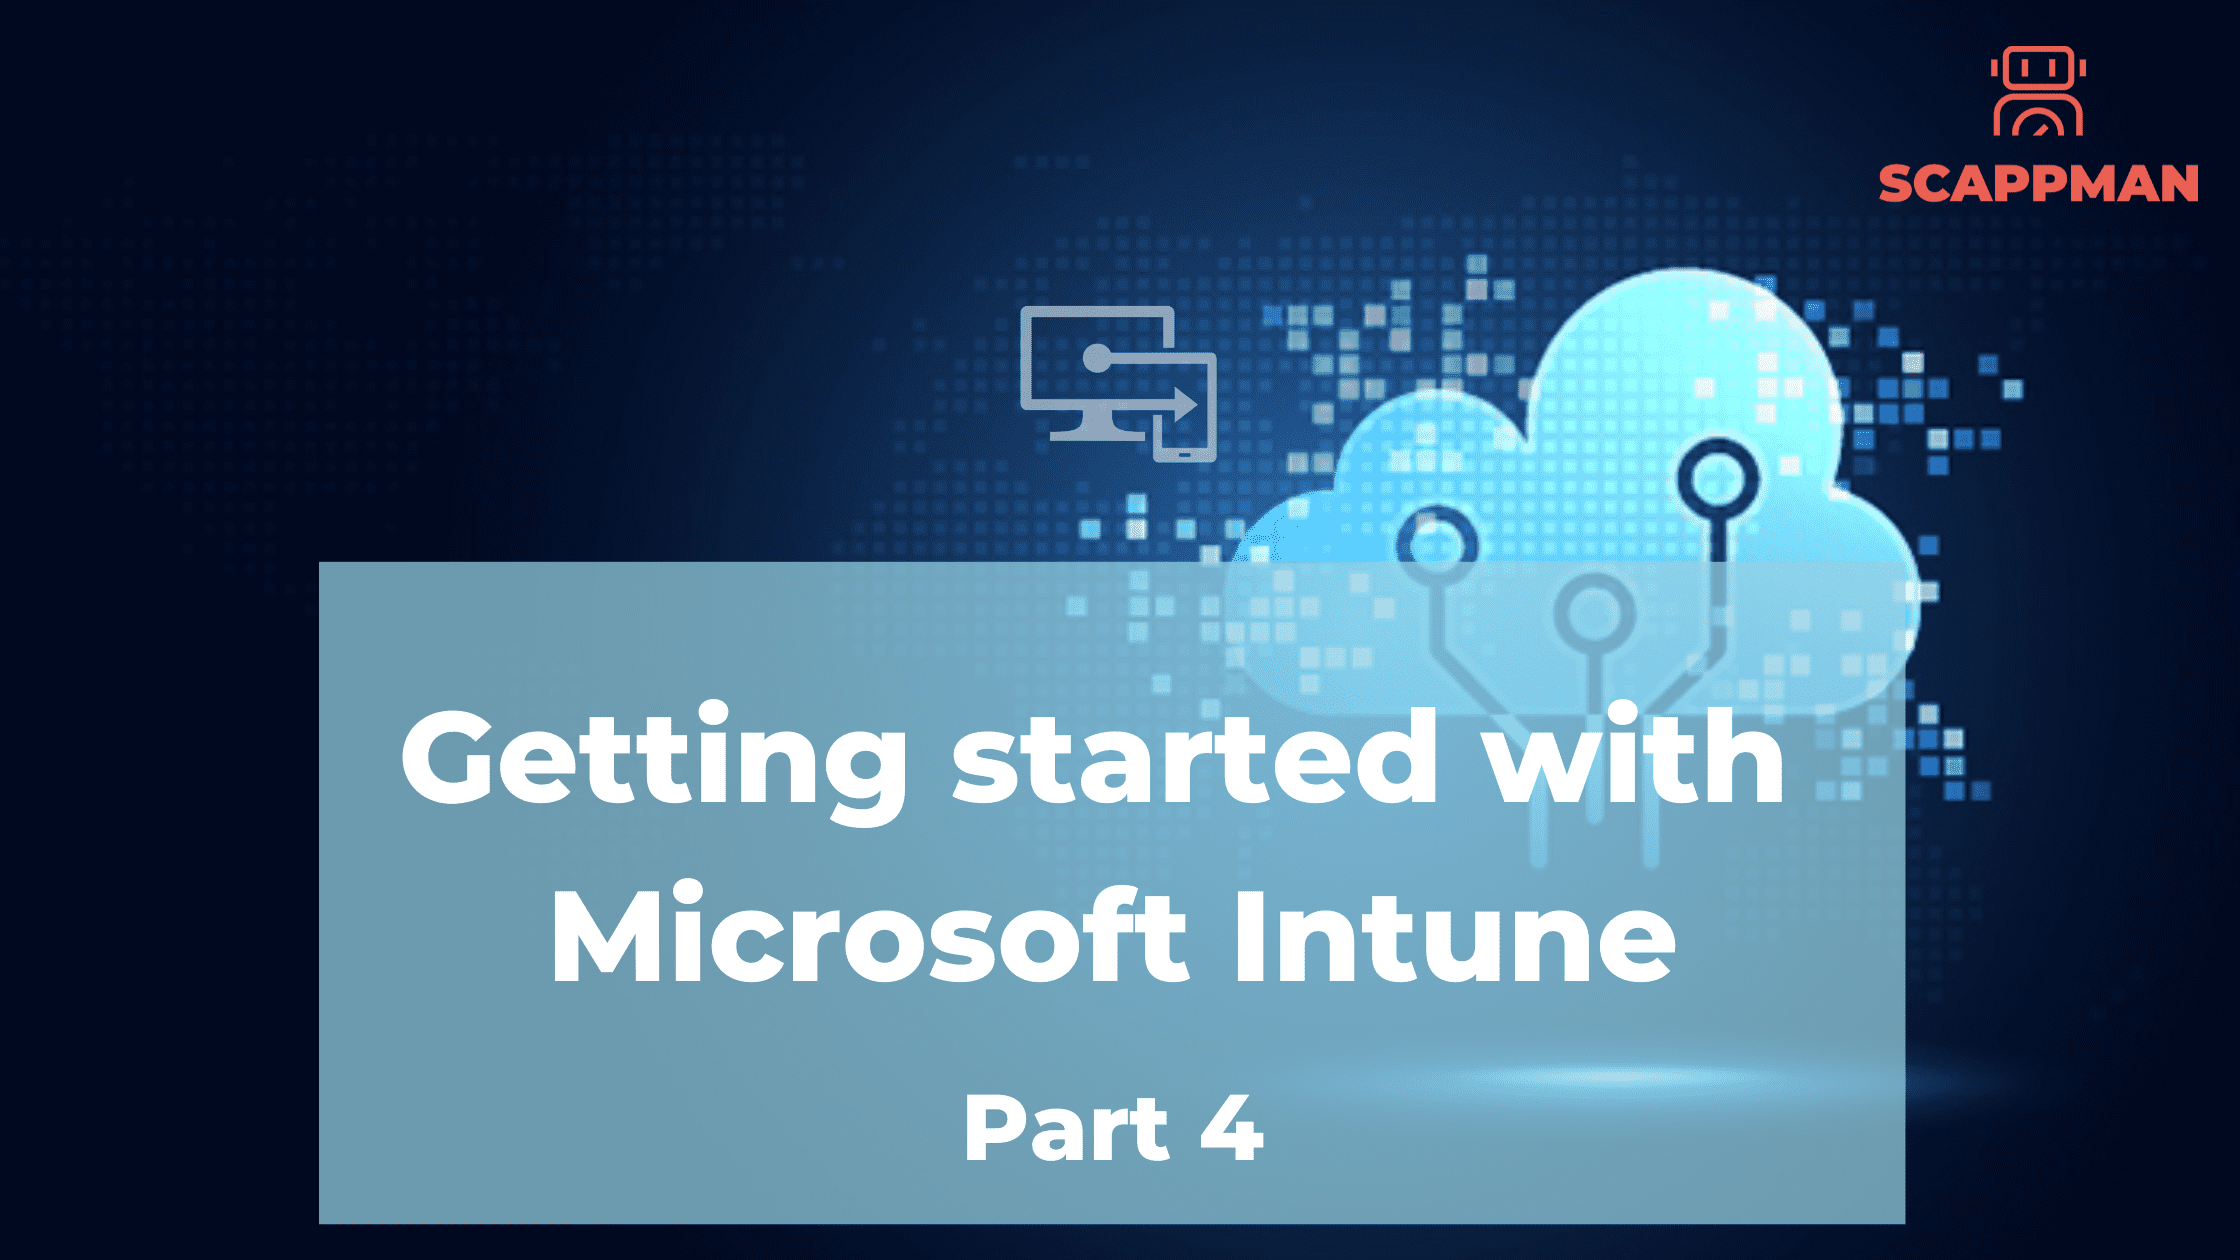 How-to guide: Getting started with Microsoft Intune (part 4)